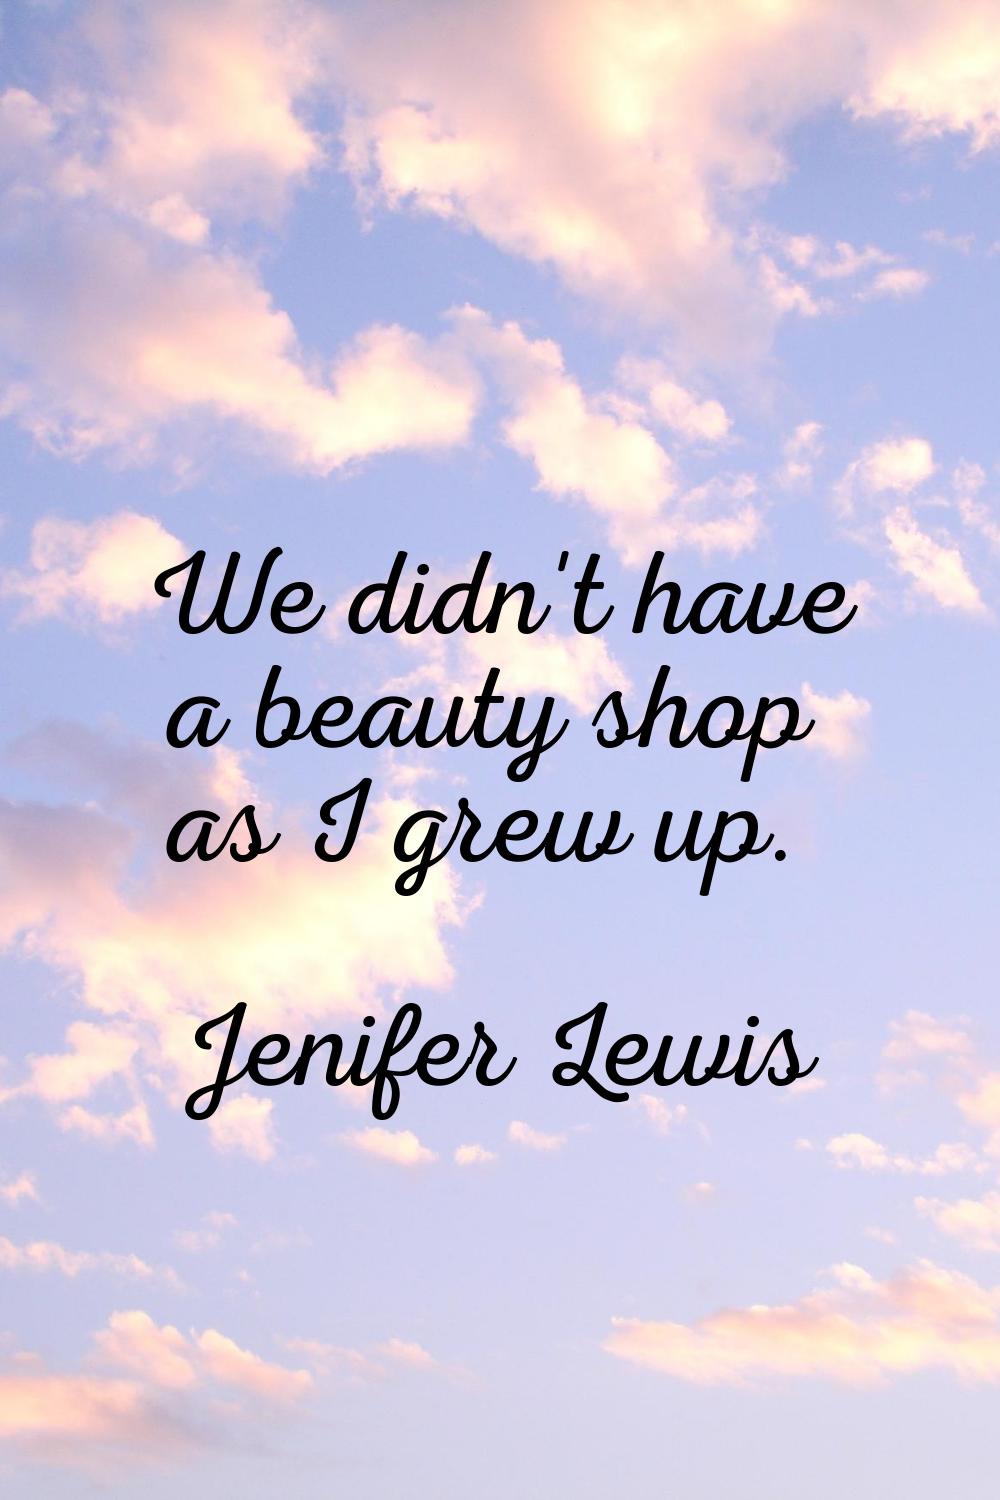 We didn't have a beauty shop as I grew up.